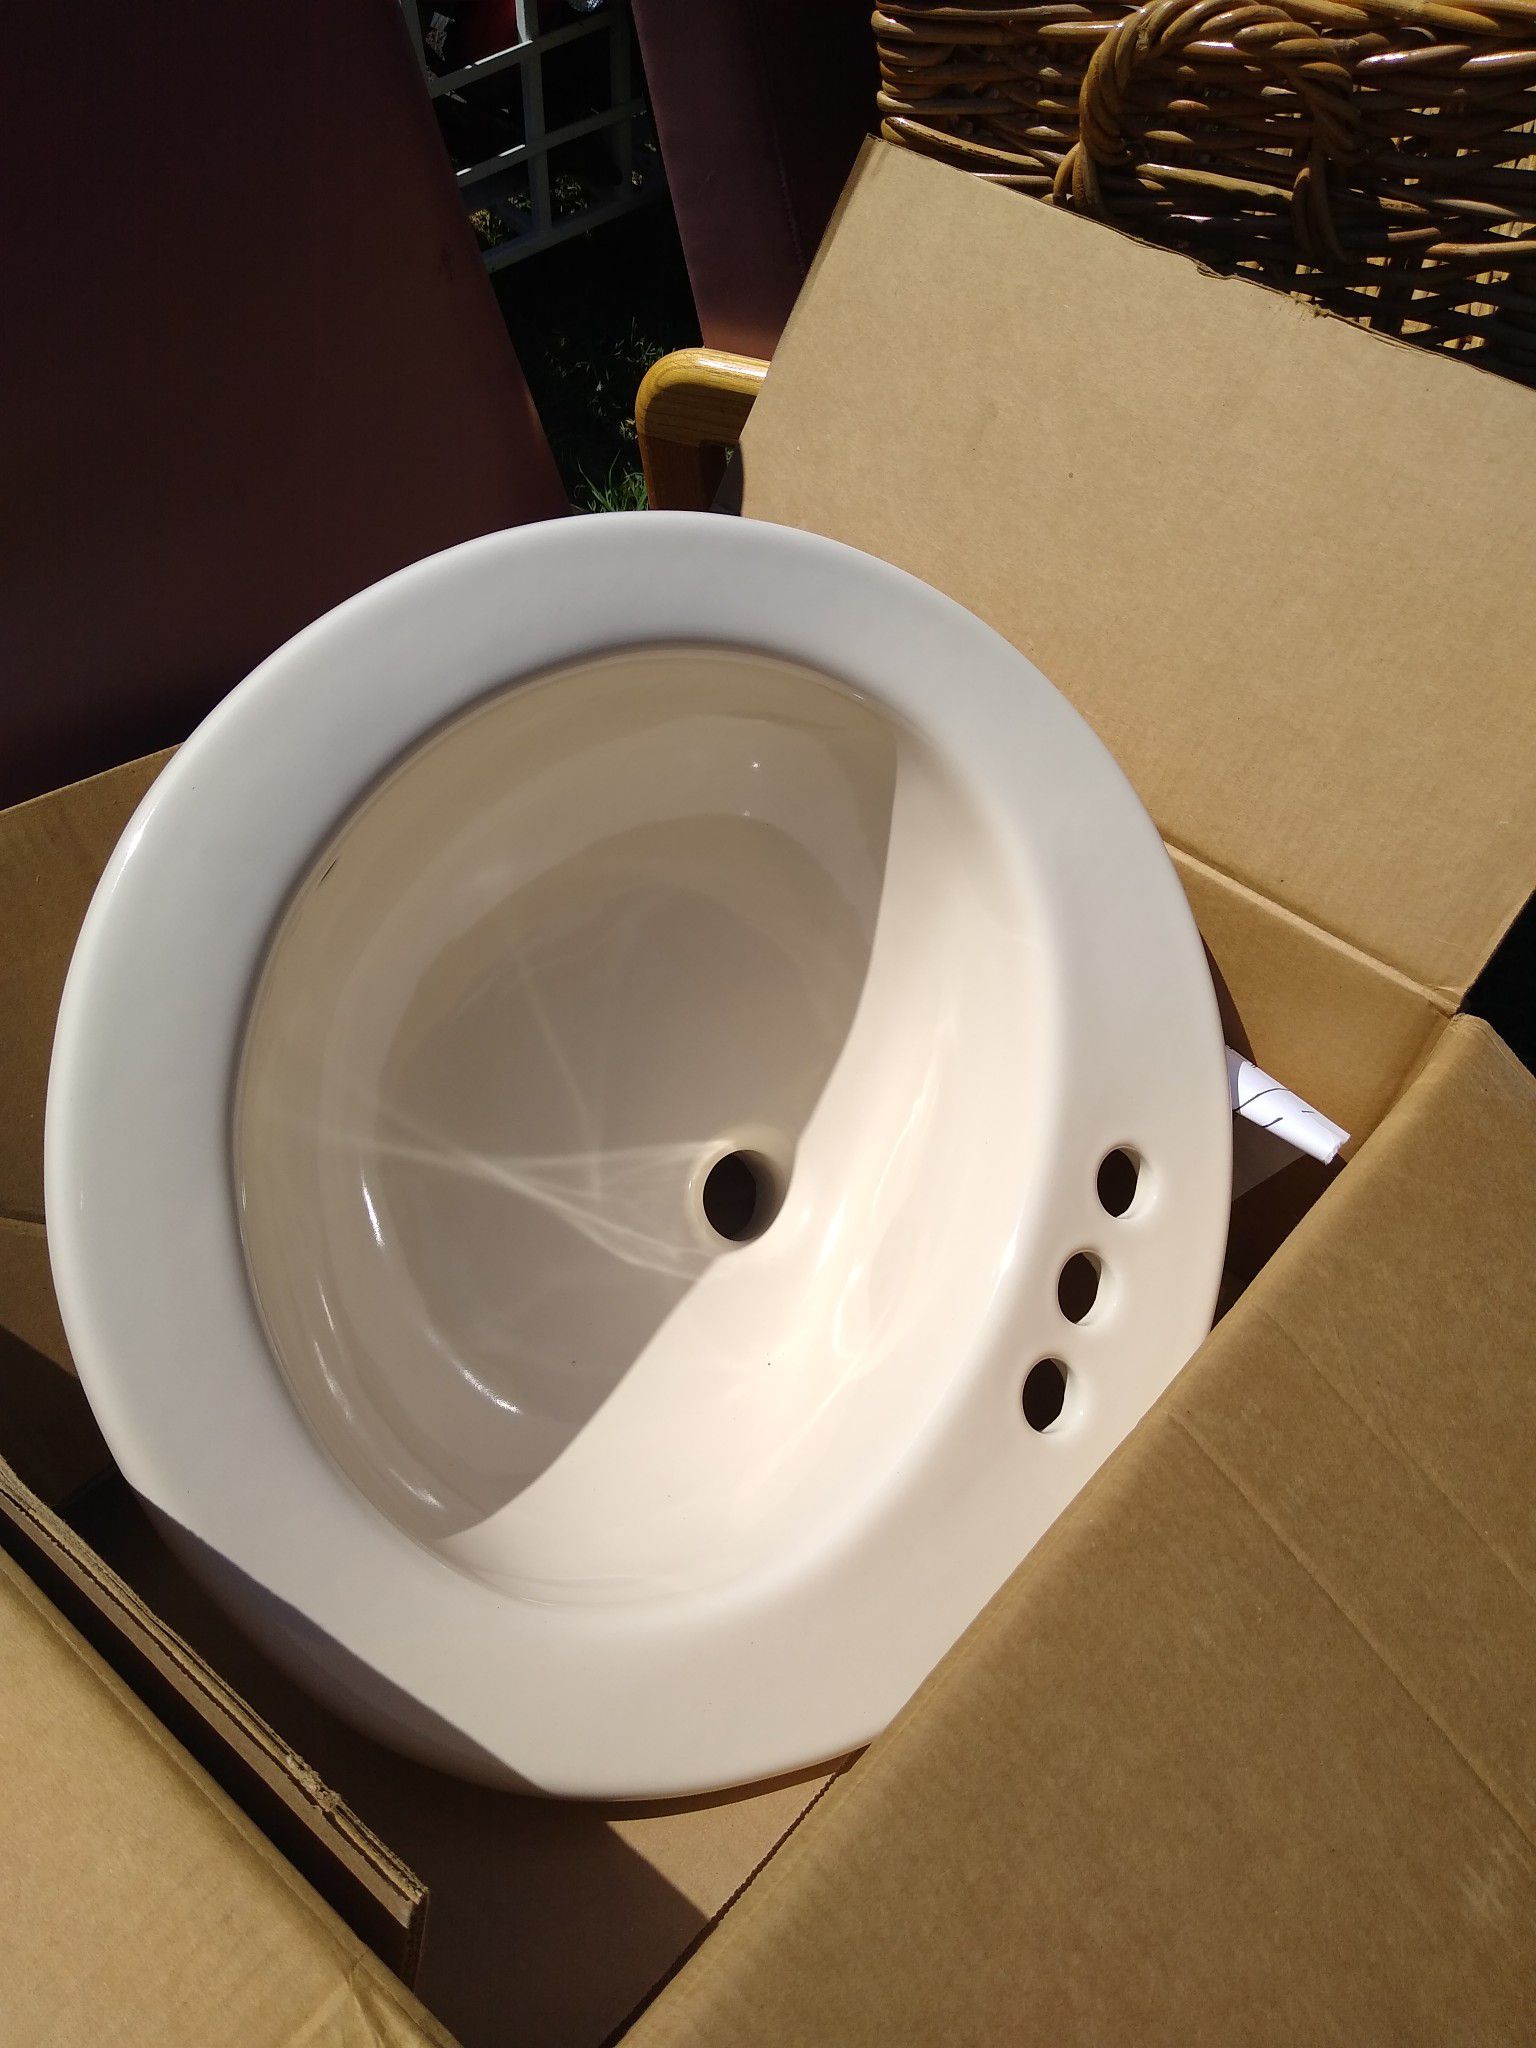 !!!Brand new sink in box $20